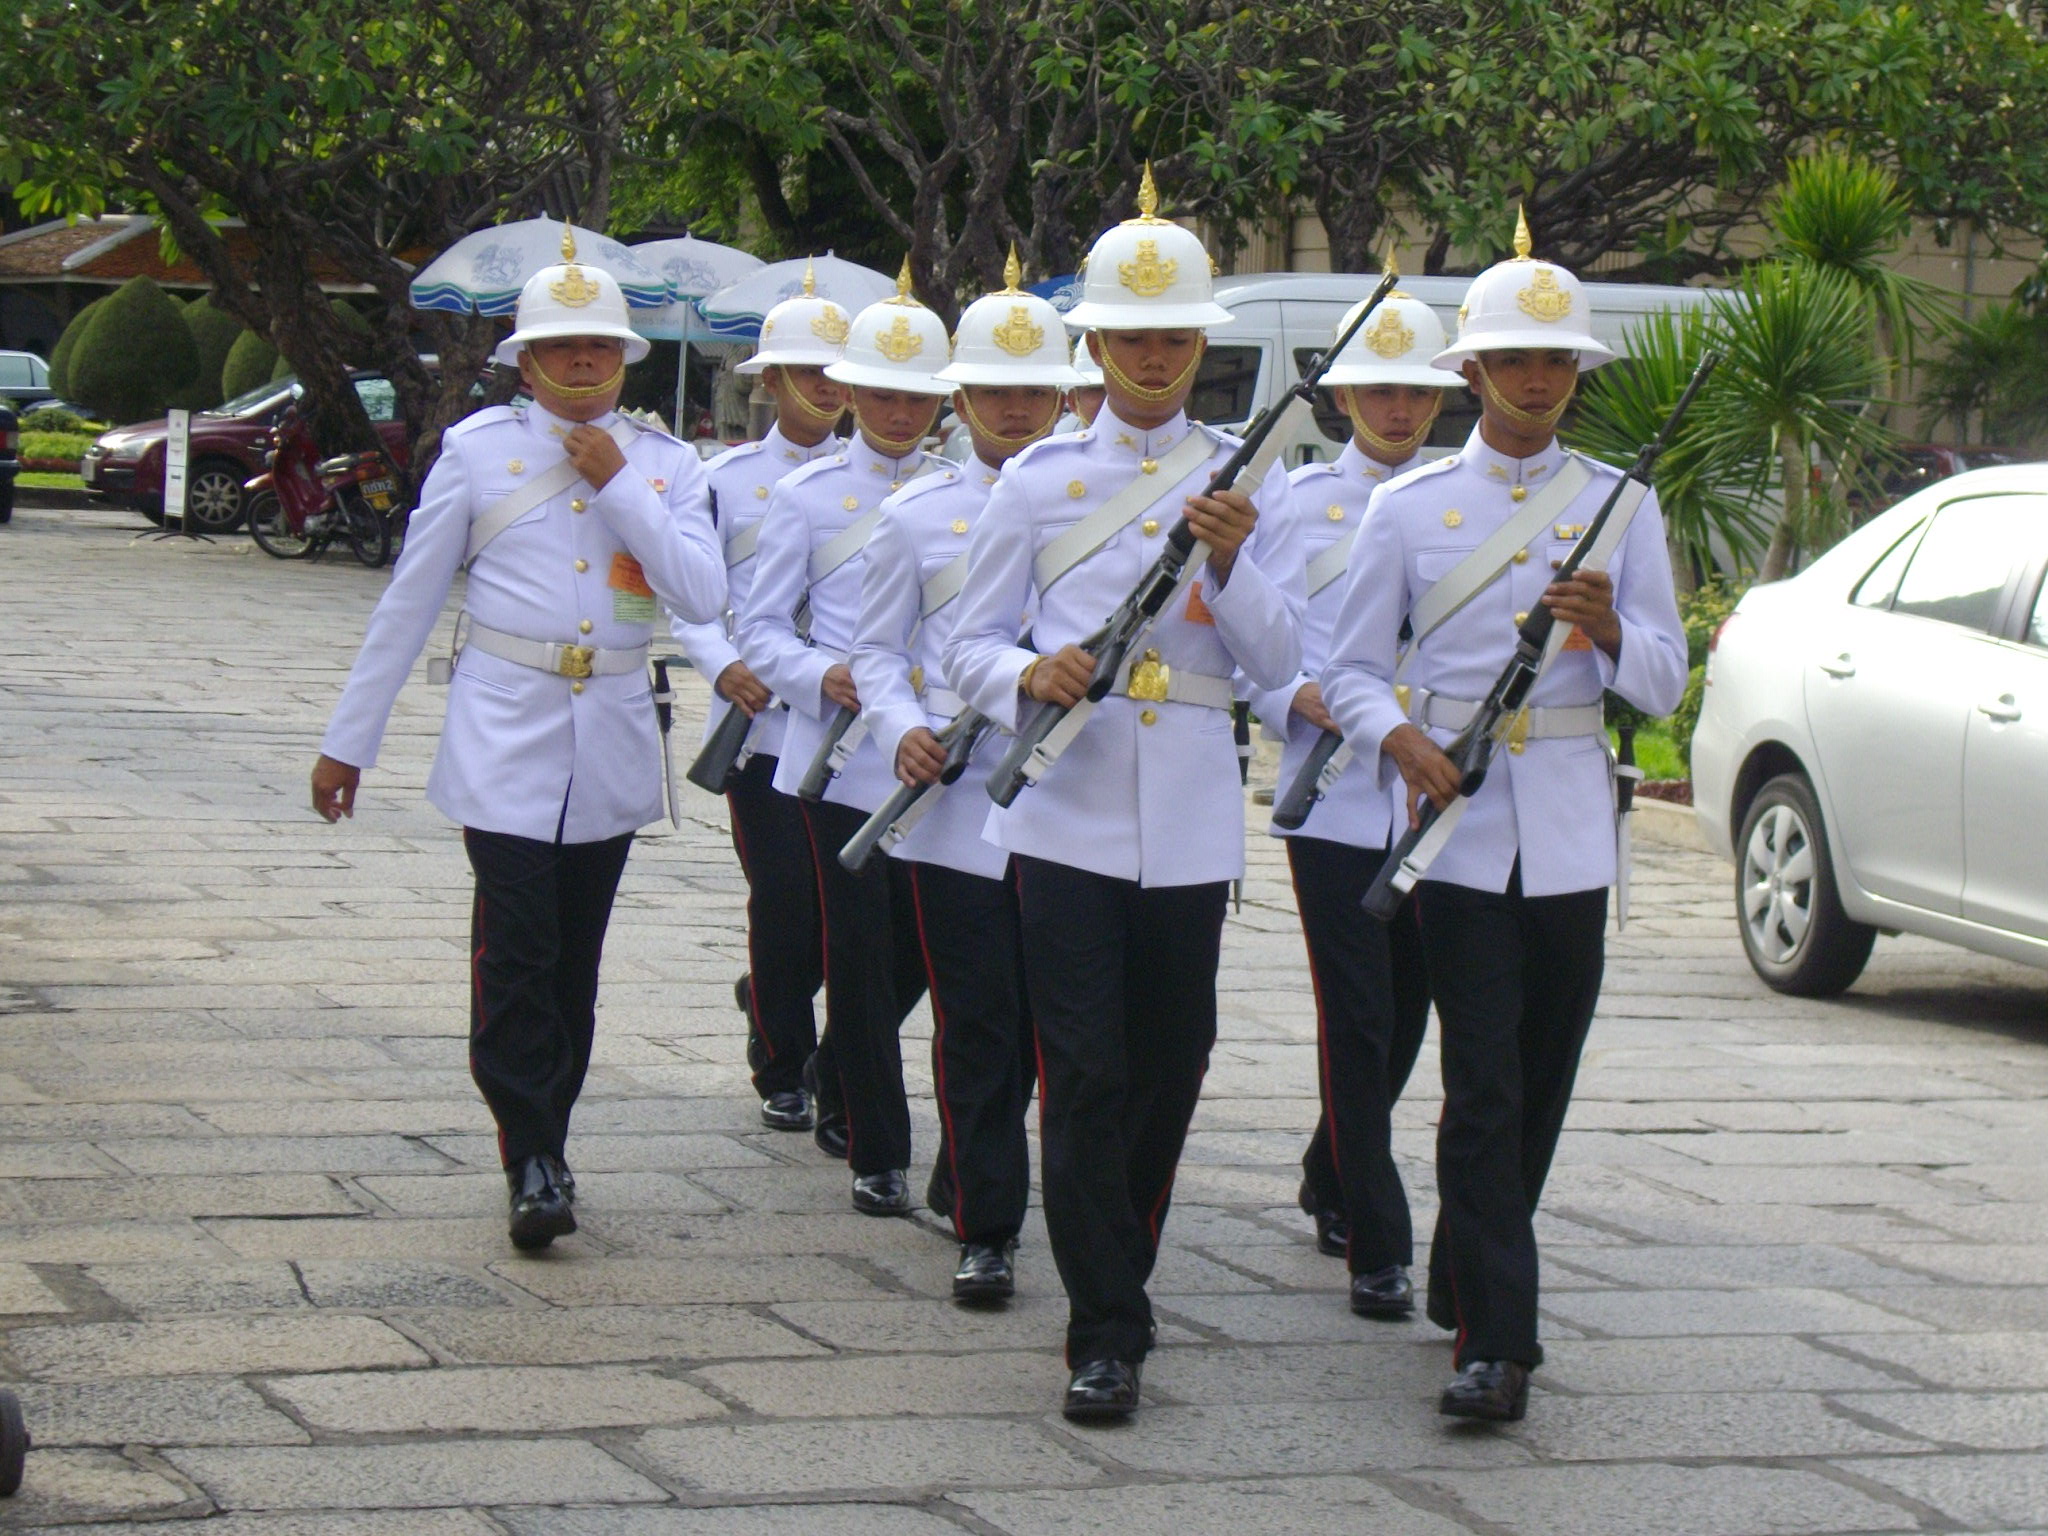 Royal_guard_march_to_change_guard_in_the_Grand_Palace,_Thailand.JPG